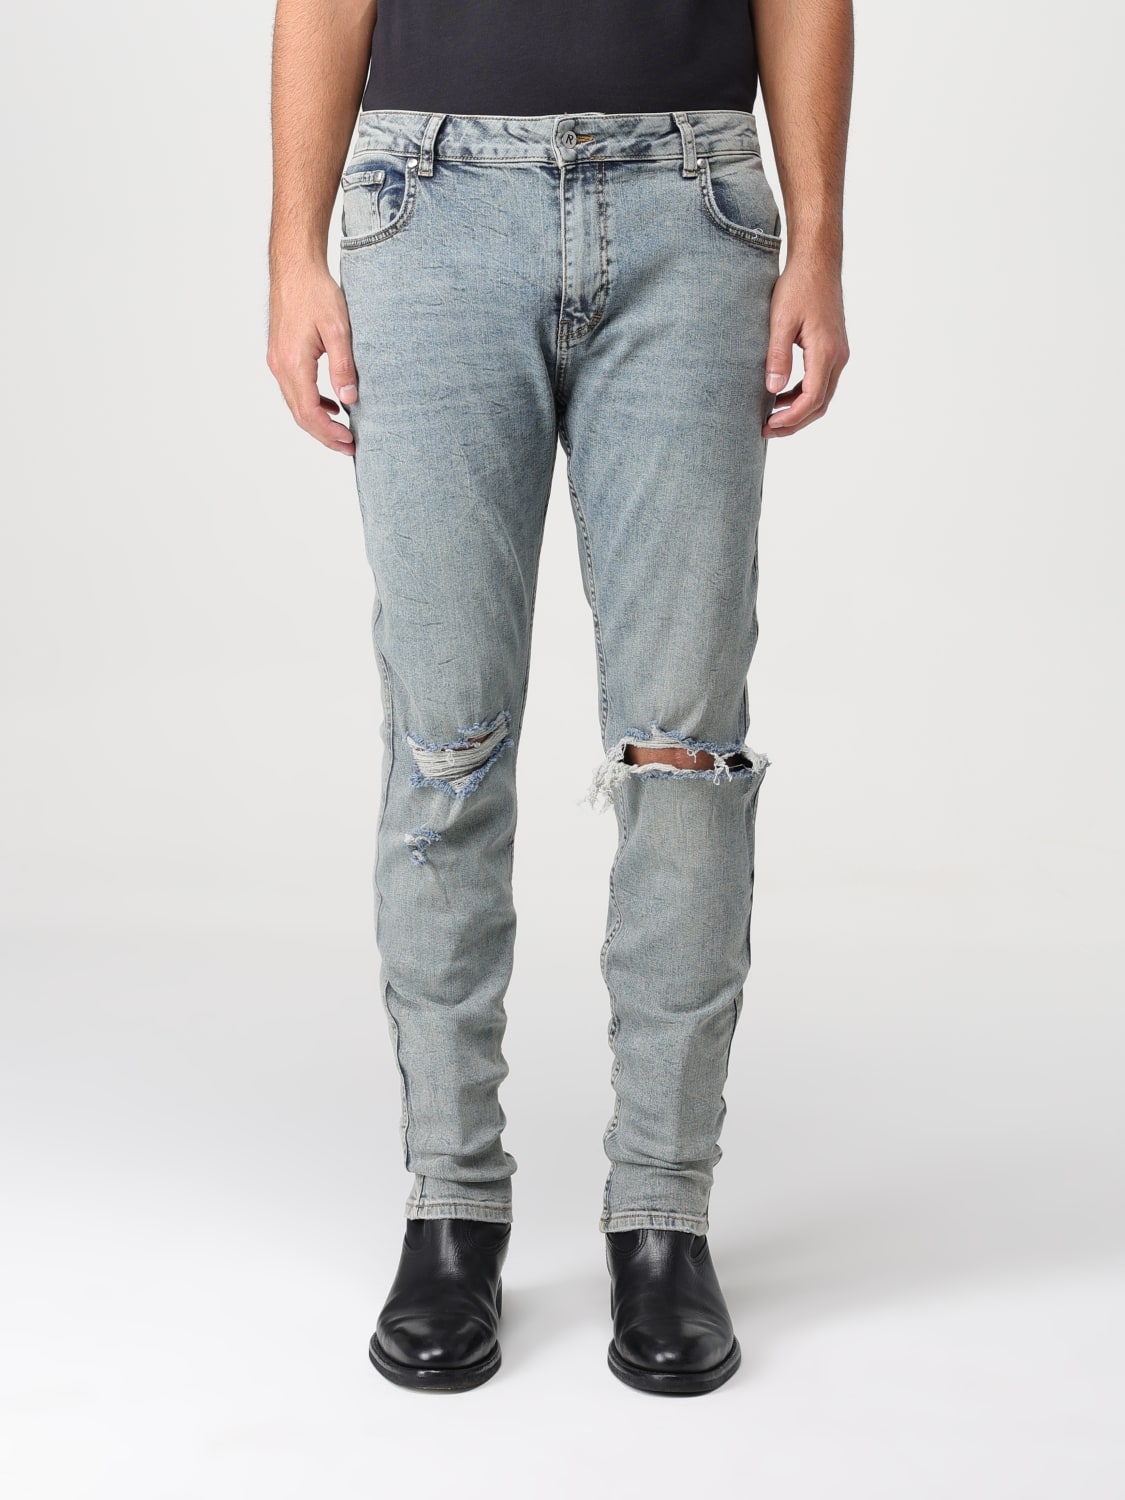 REPRESENT: jeans for man - Blue | Represent jeans ME6001 online at ...